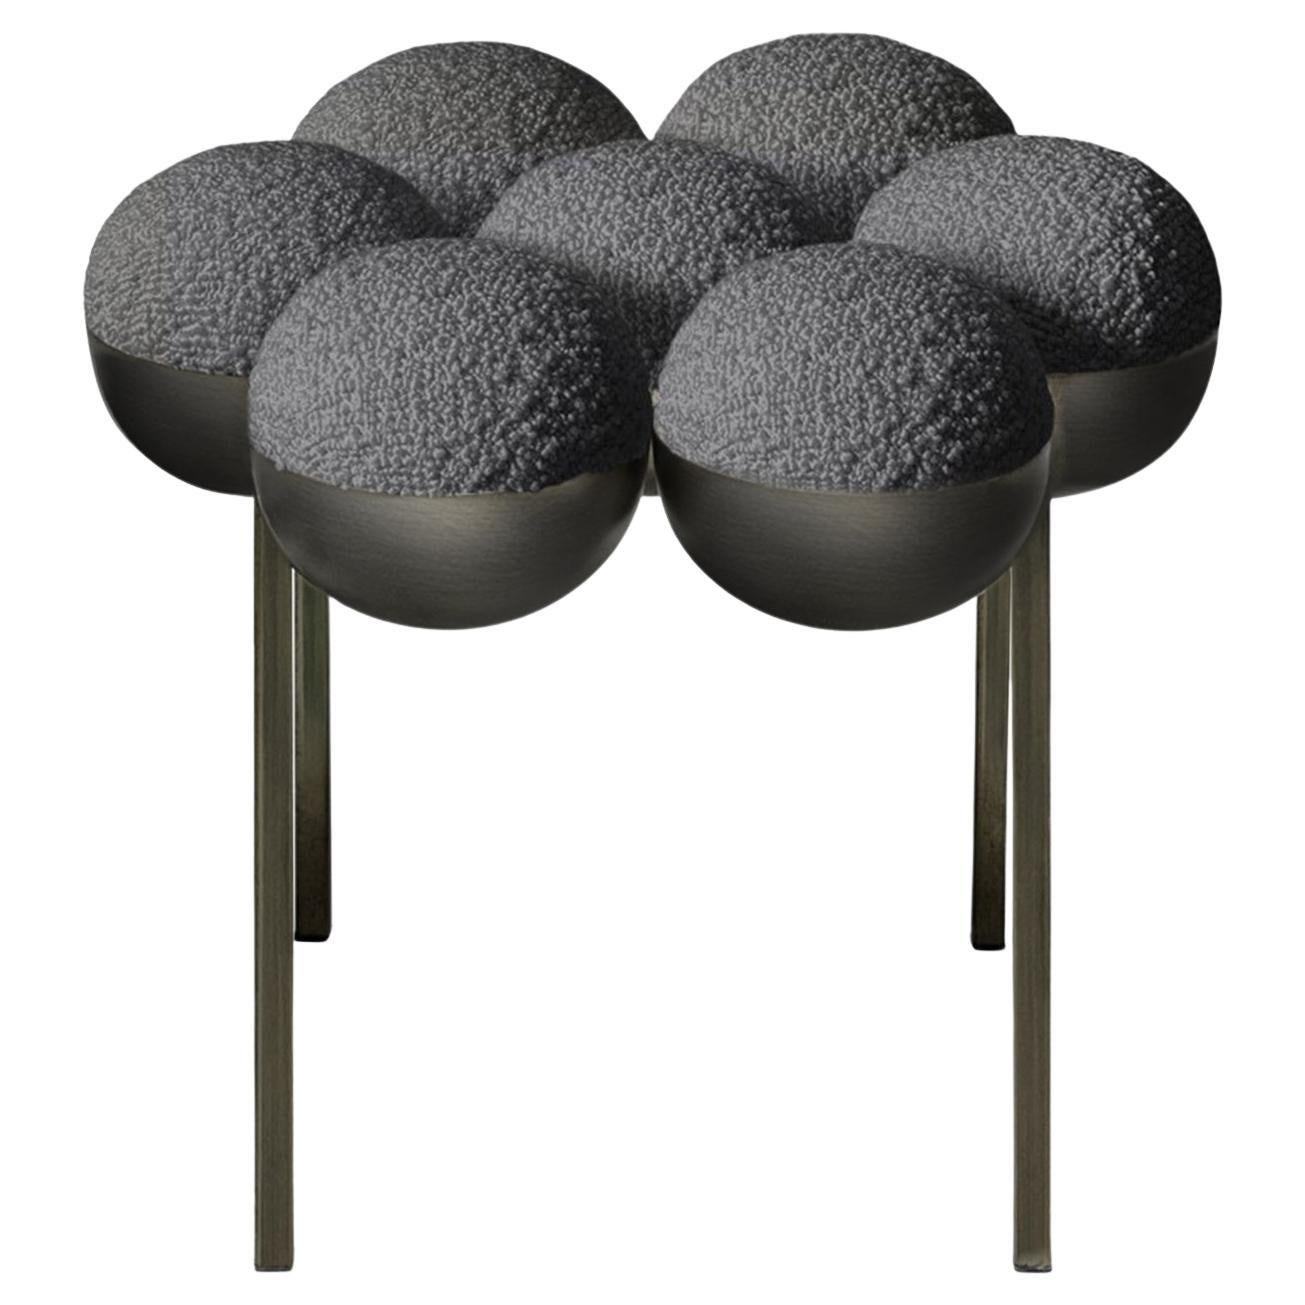 Saturn Pouffe Small, Bronze Oxidized Steel Frame and Grey Boucle by Lara Bohinc